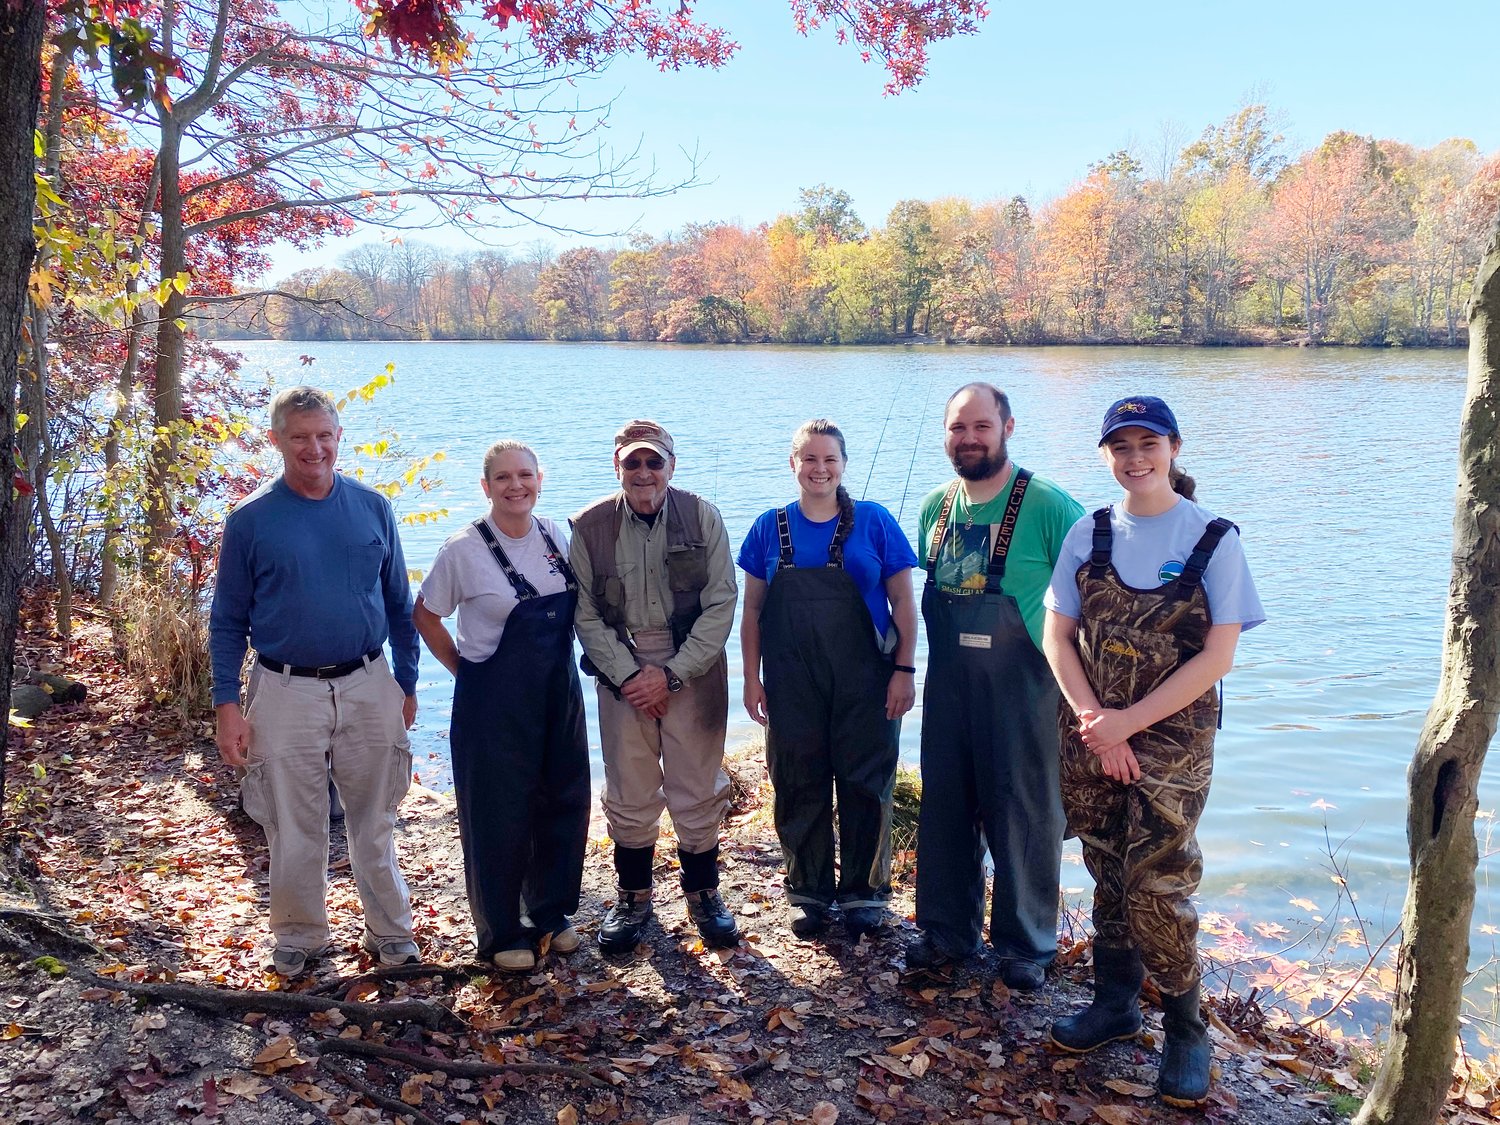 NYSDEC workers and volunteers Bill Fonda, Heidi O’Riordan, Marty Weinstein, Rebecca Terry, Joshua Laedke, and Lauren Tuffy helped stock brown trout in Wantagh’s Upper Twin Pond.